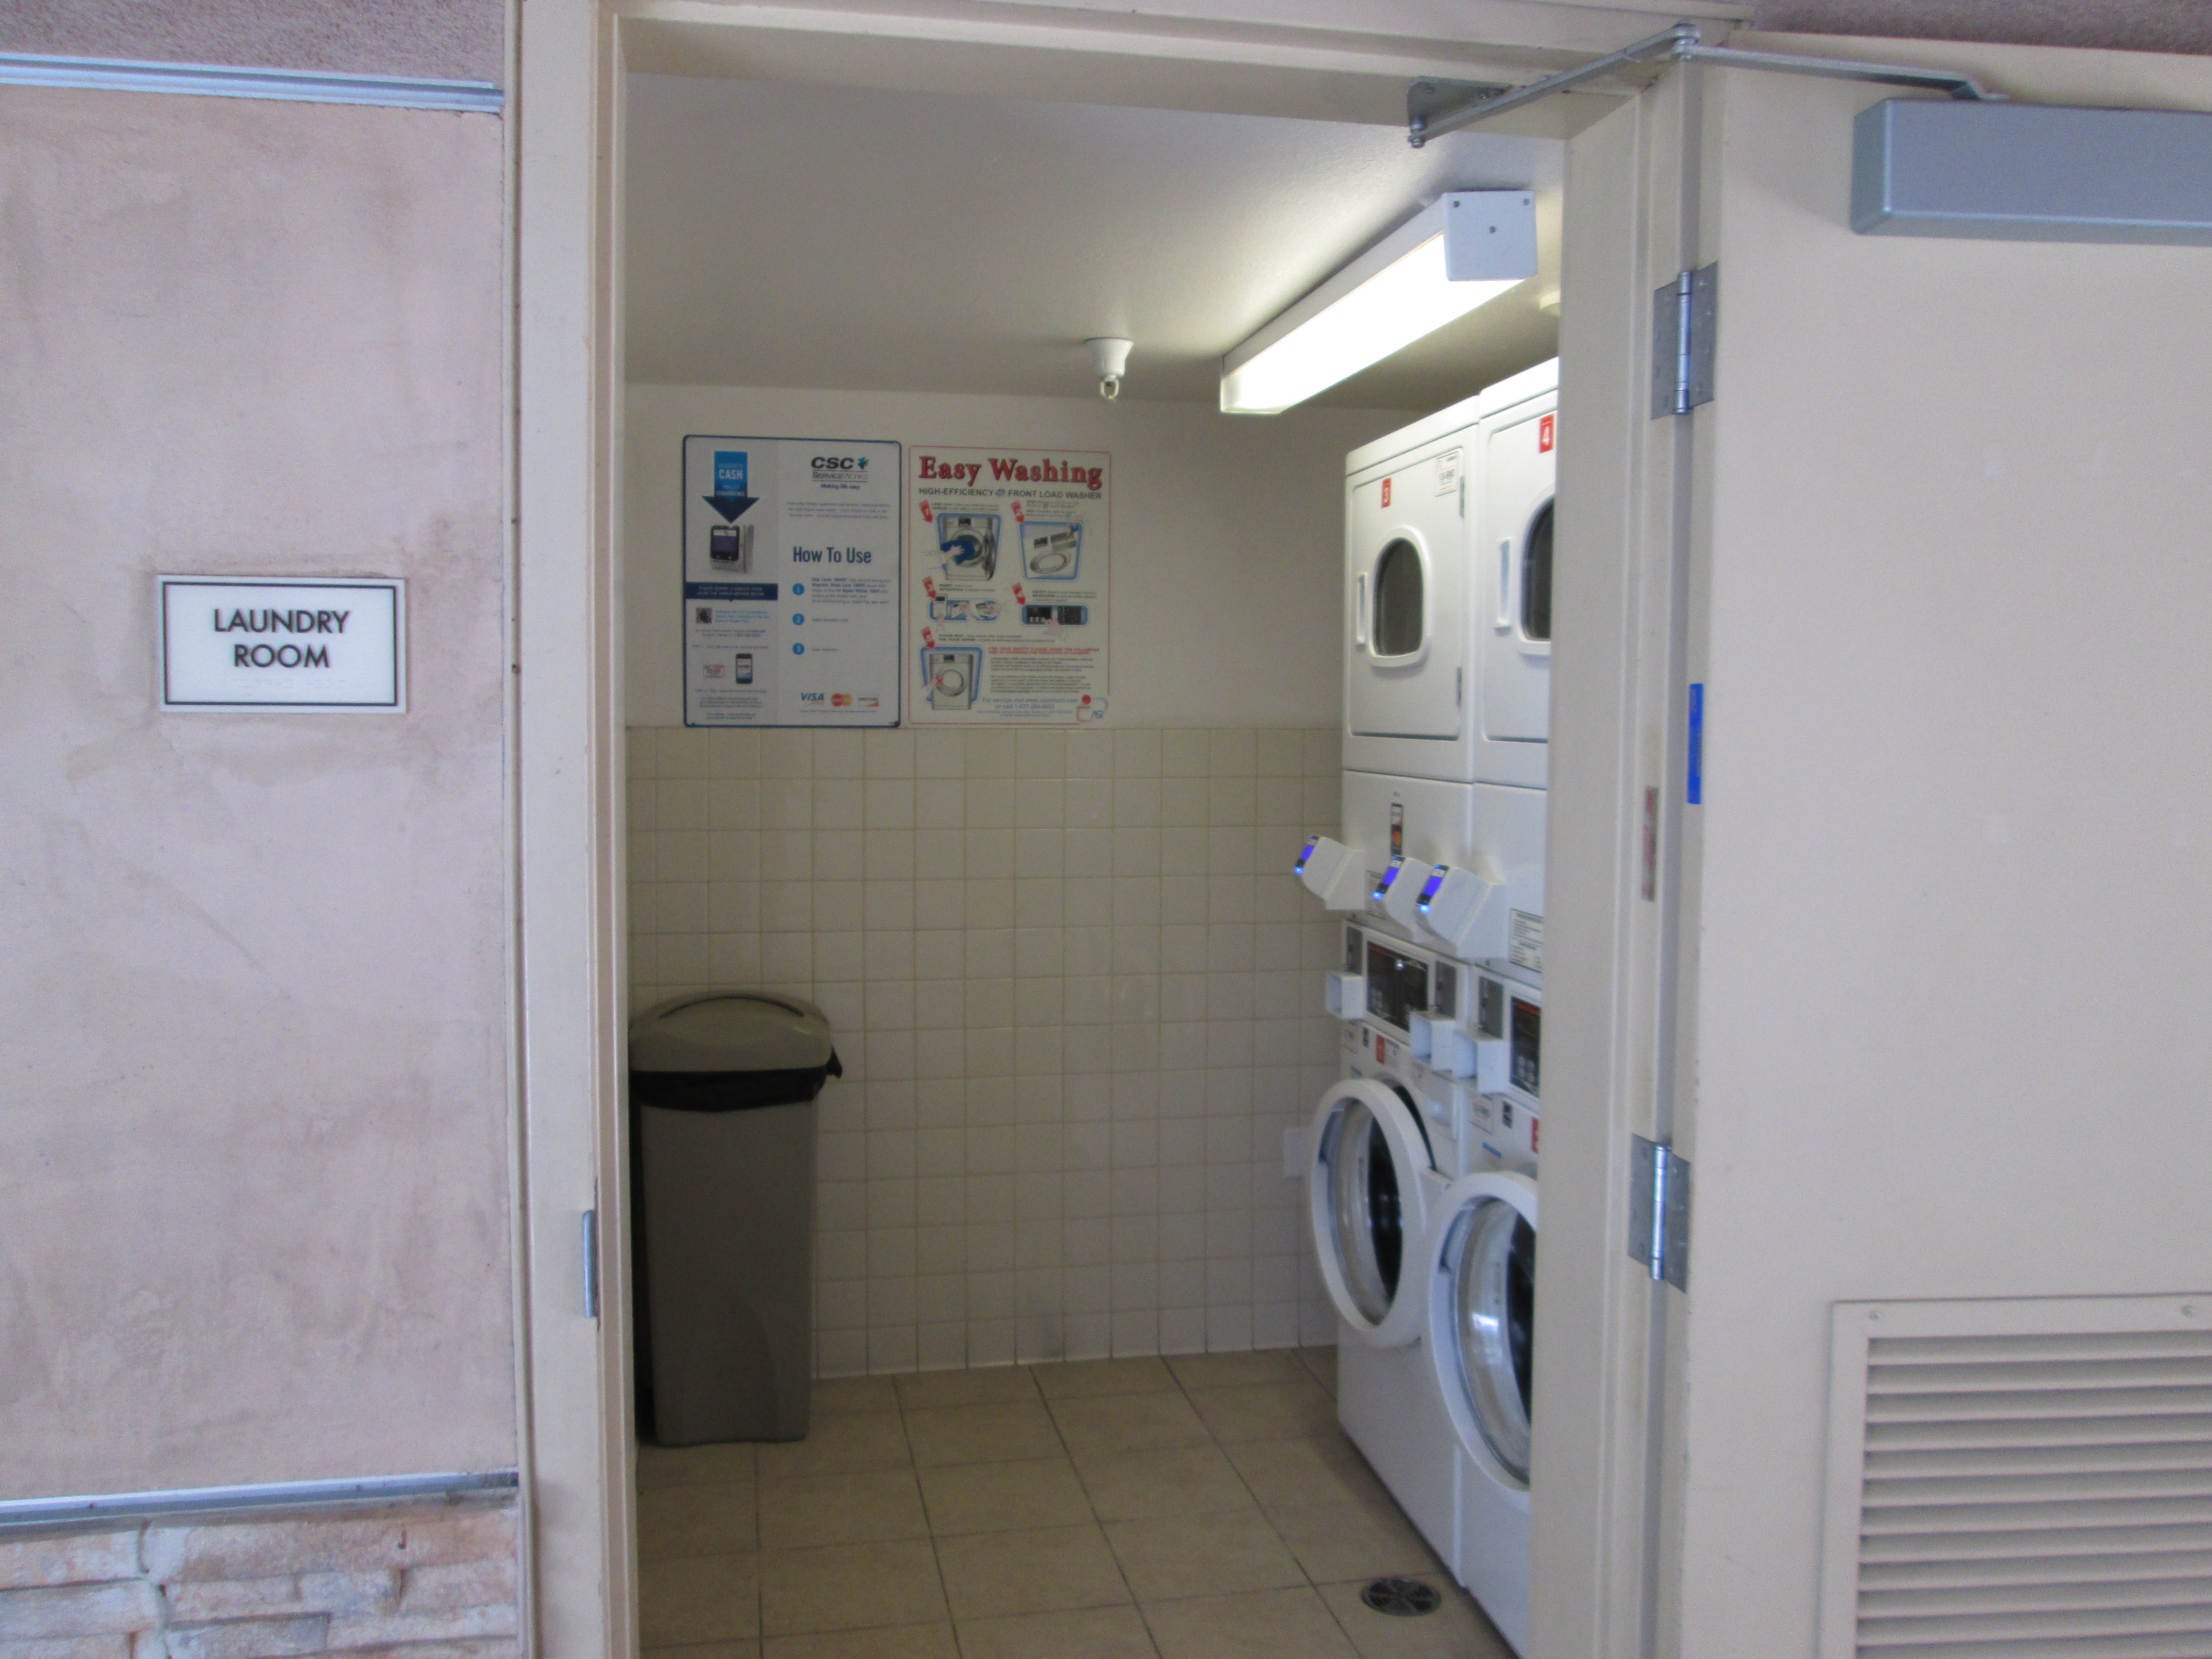 View of a laundry room at Cuatro Vientos showing two washers and two dryers